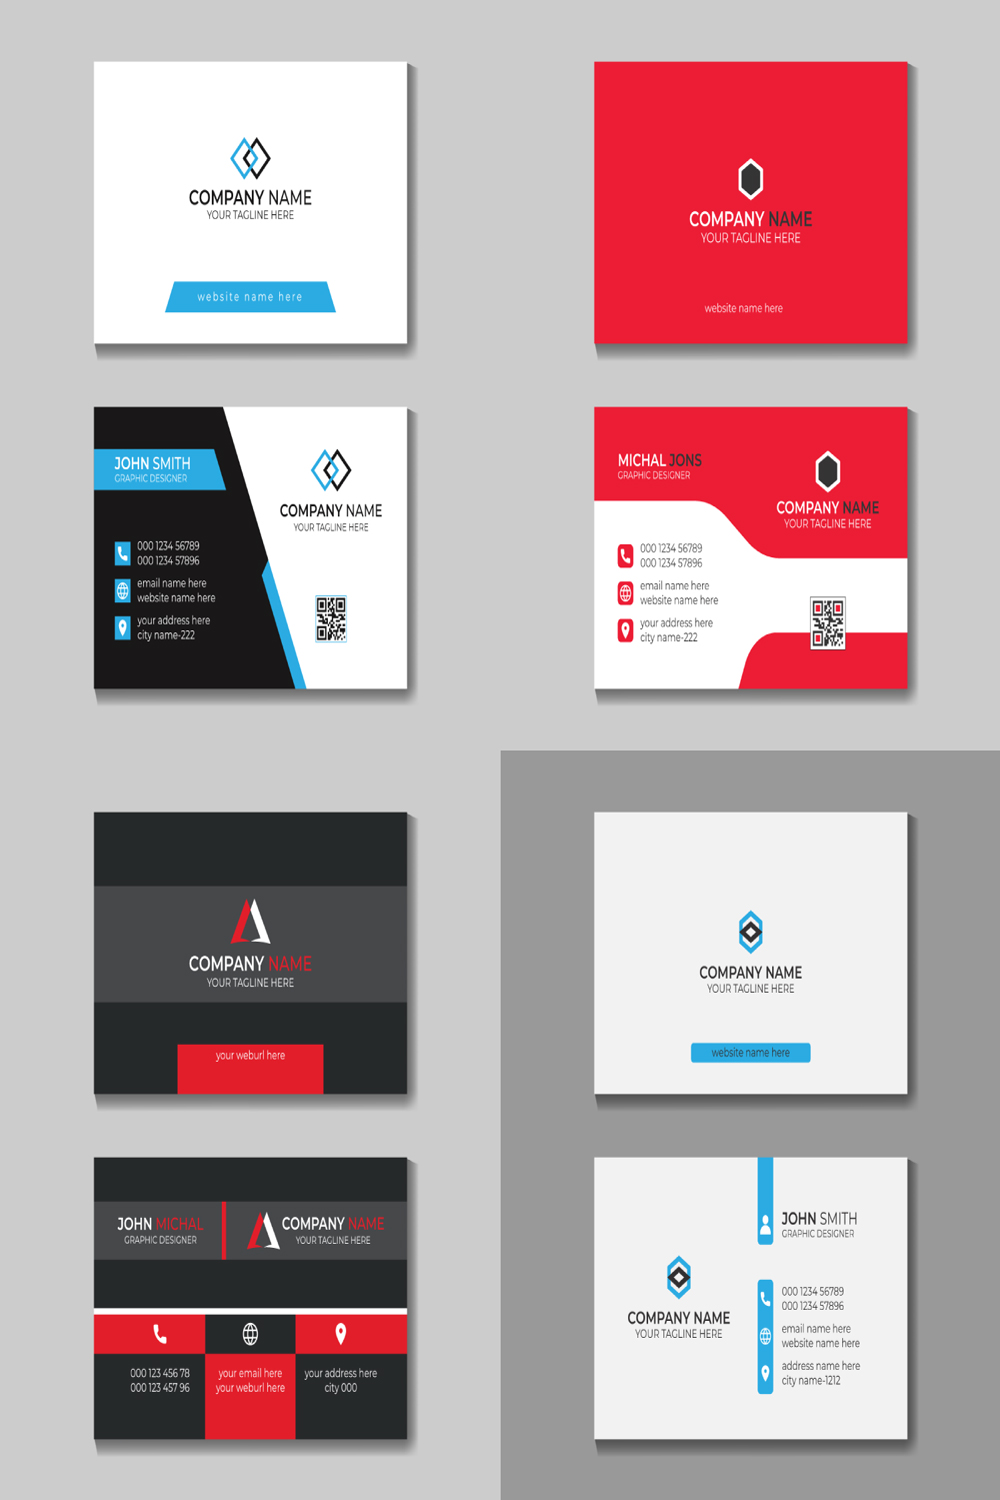 pinterest image 4 Stylish and Professional Business Card Design Templates